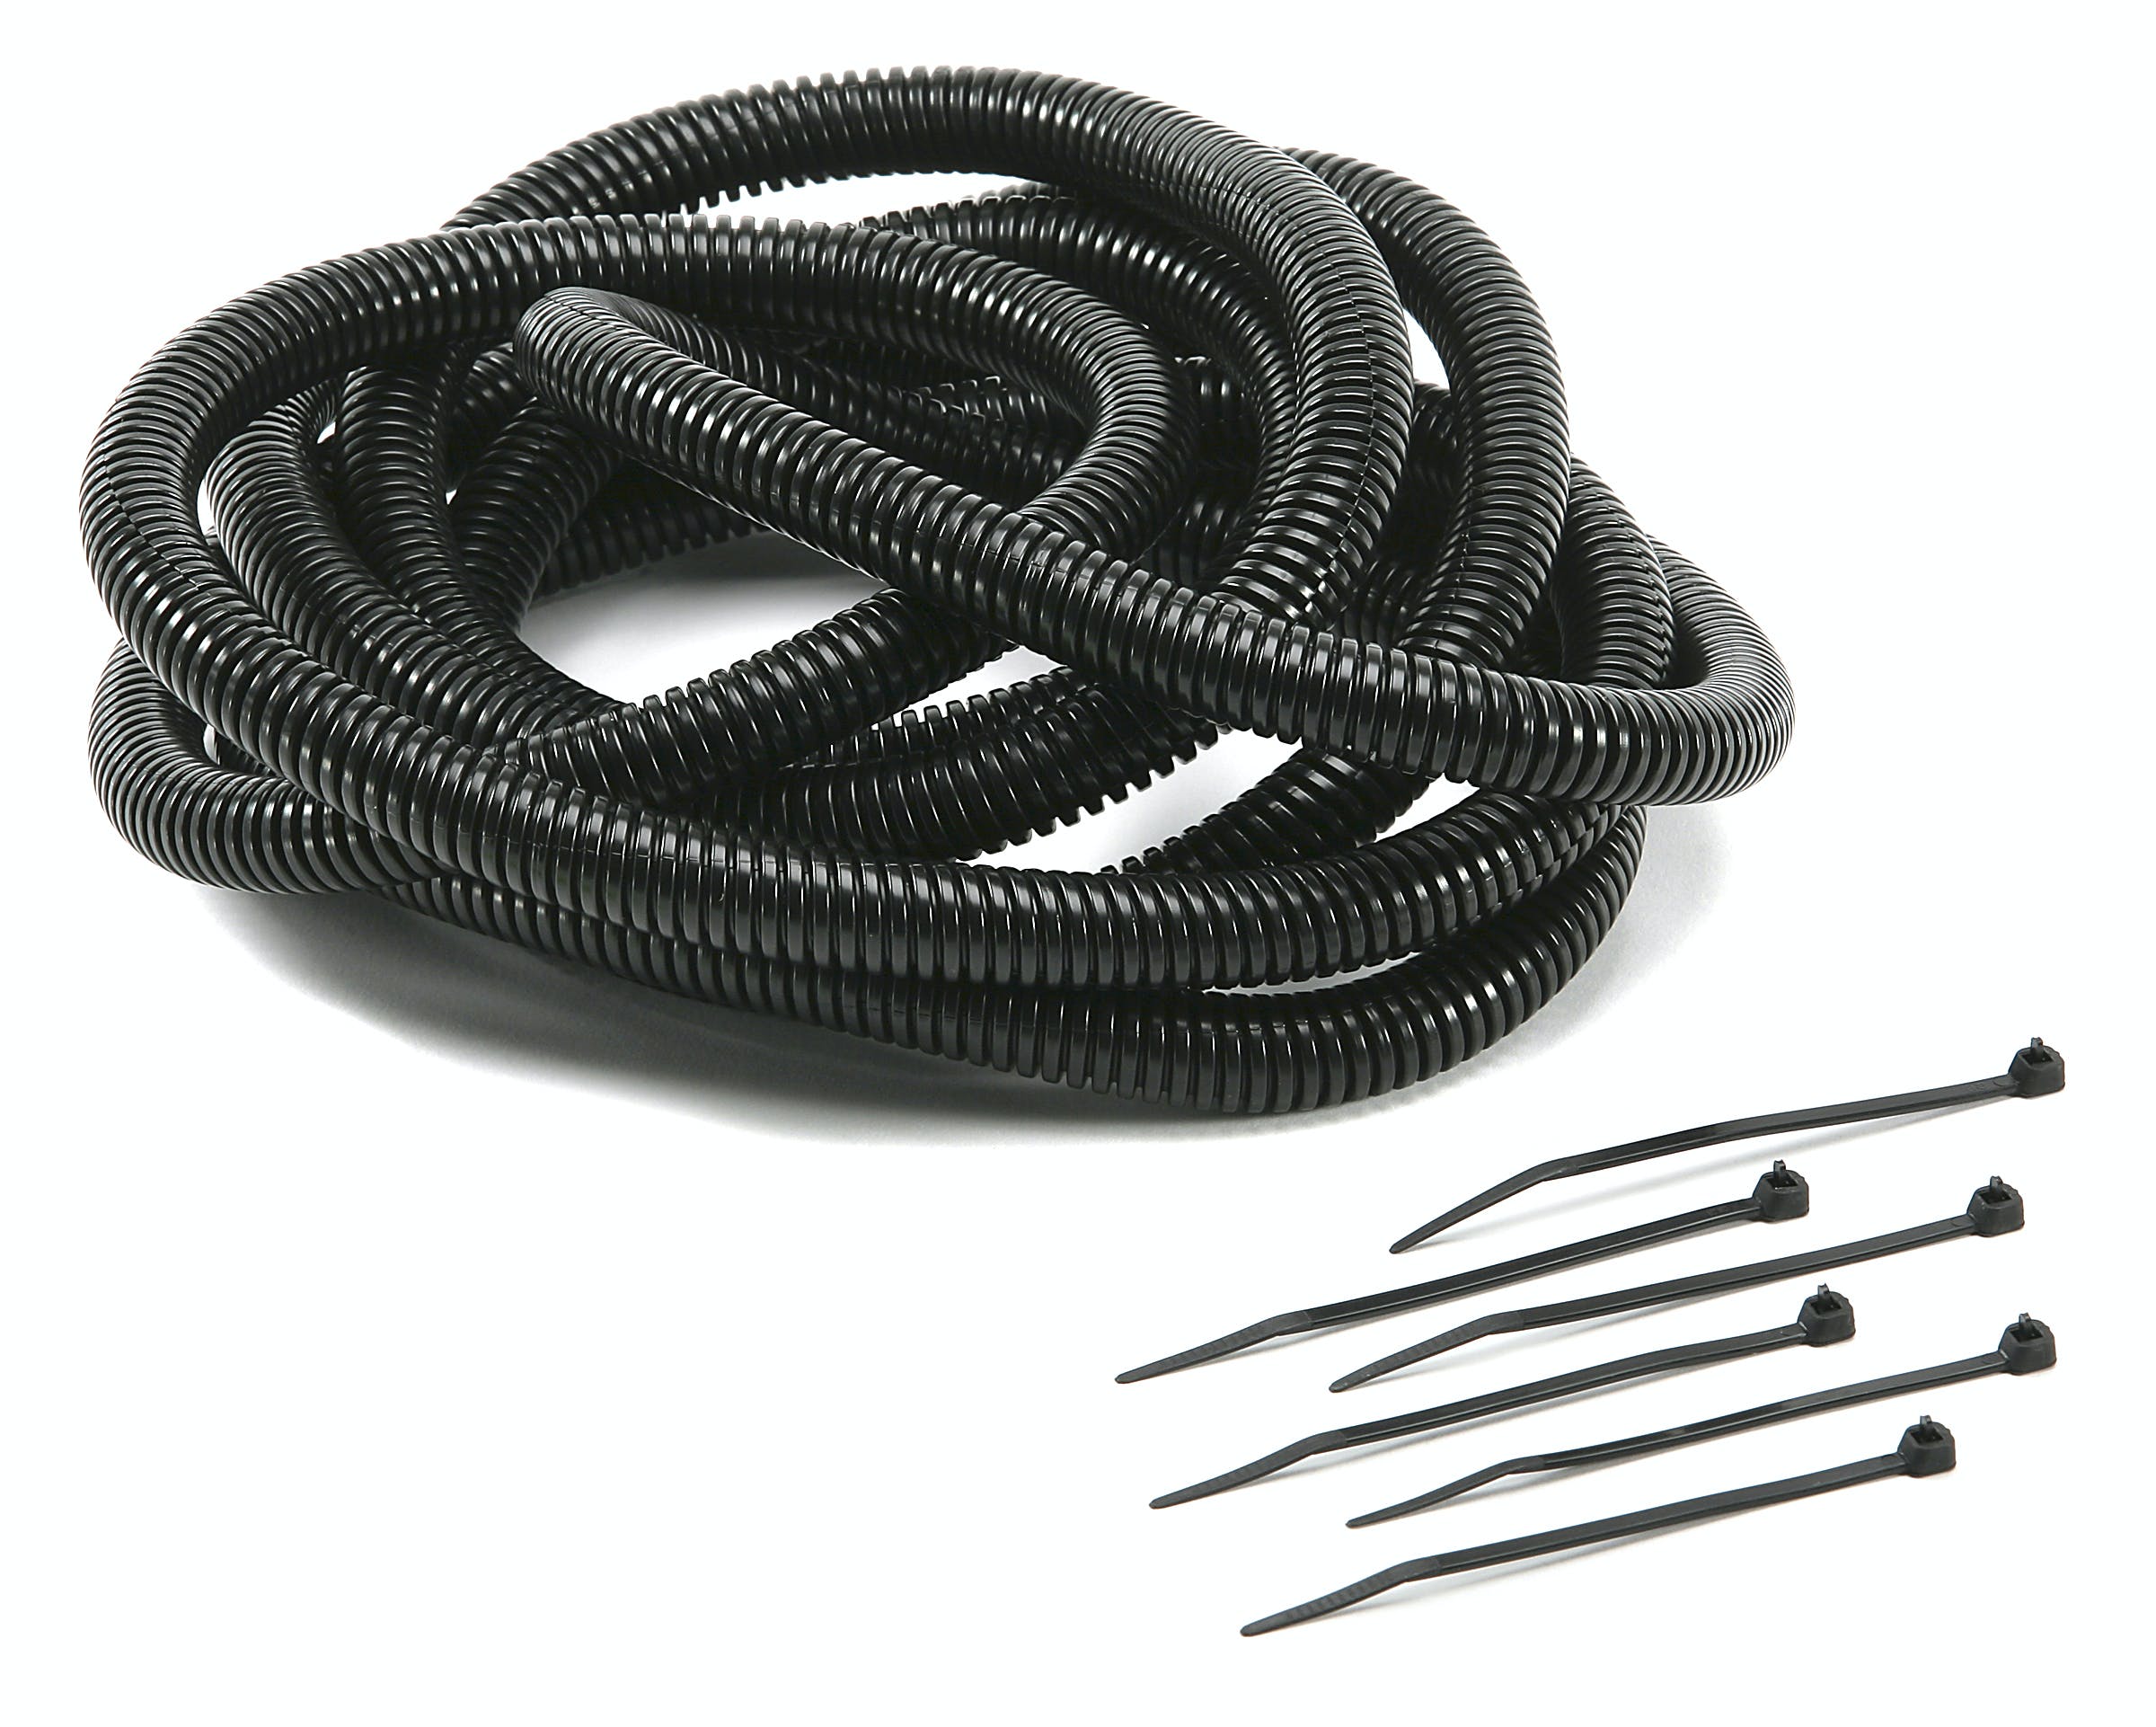 Mr. Gasket 4505 WIRE COVER KIT 8L X 3/8 BLK